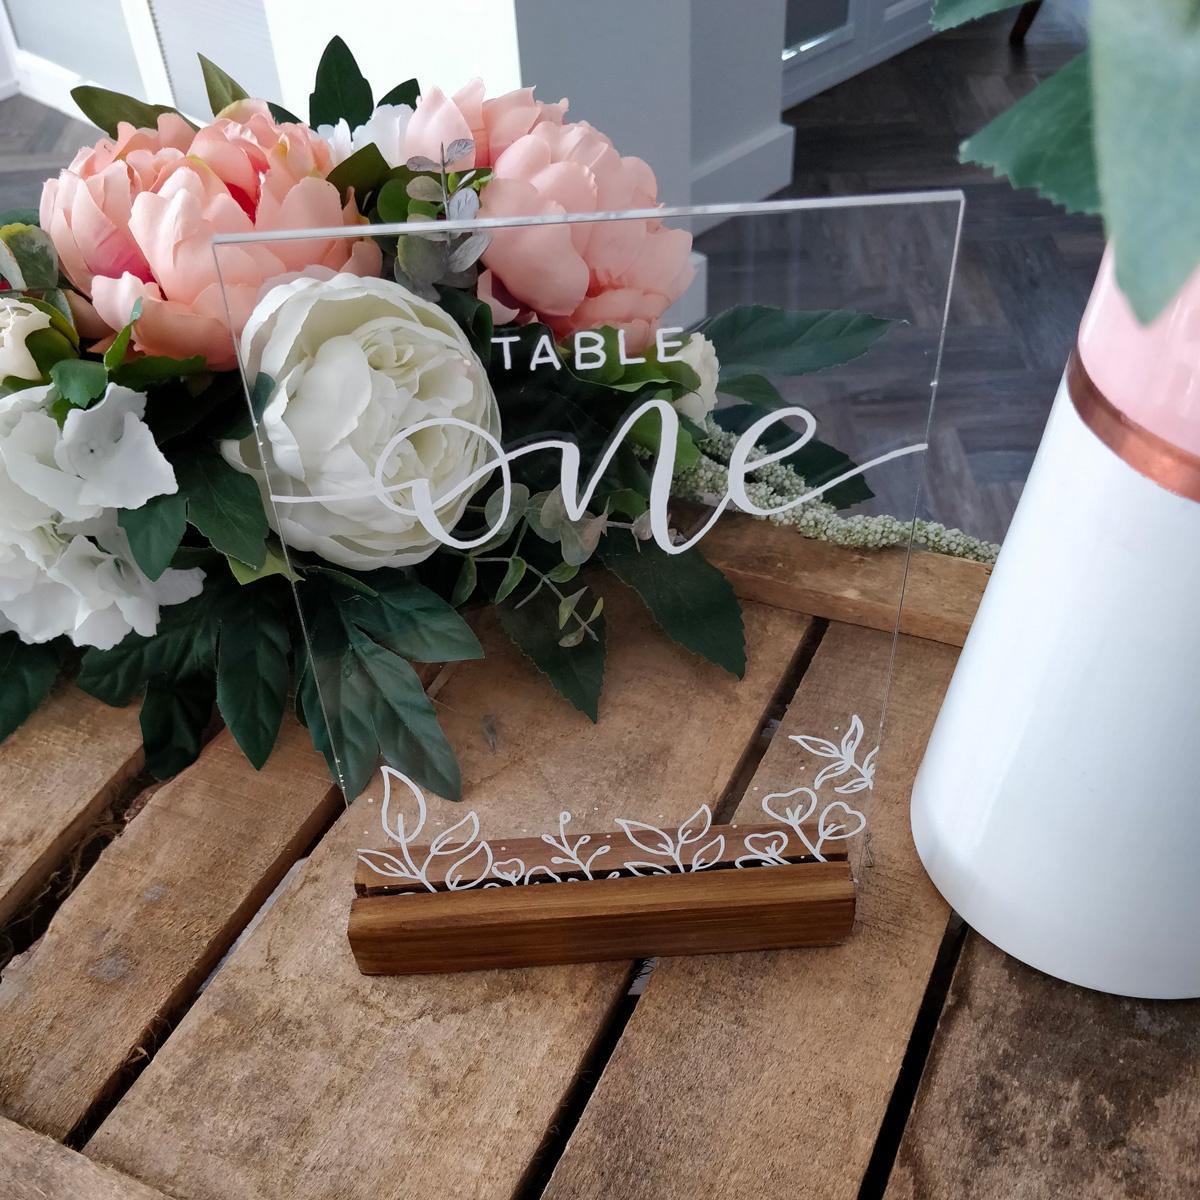 35 Table Name Holder Ideas (and How to Make Your Own) 